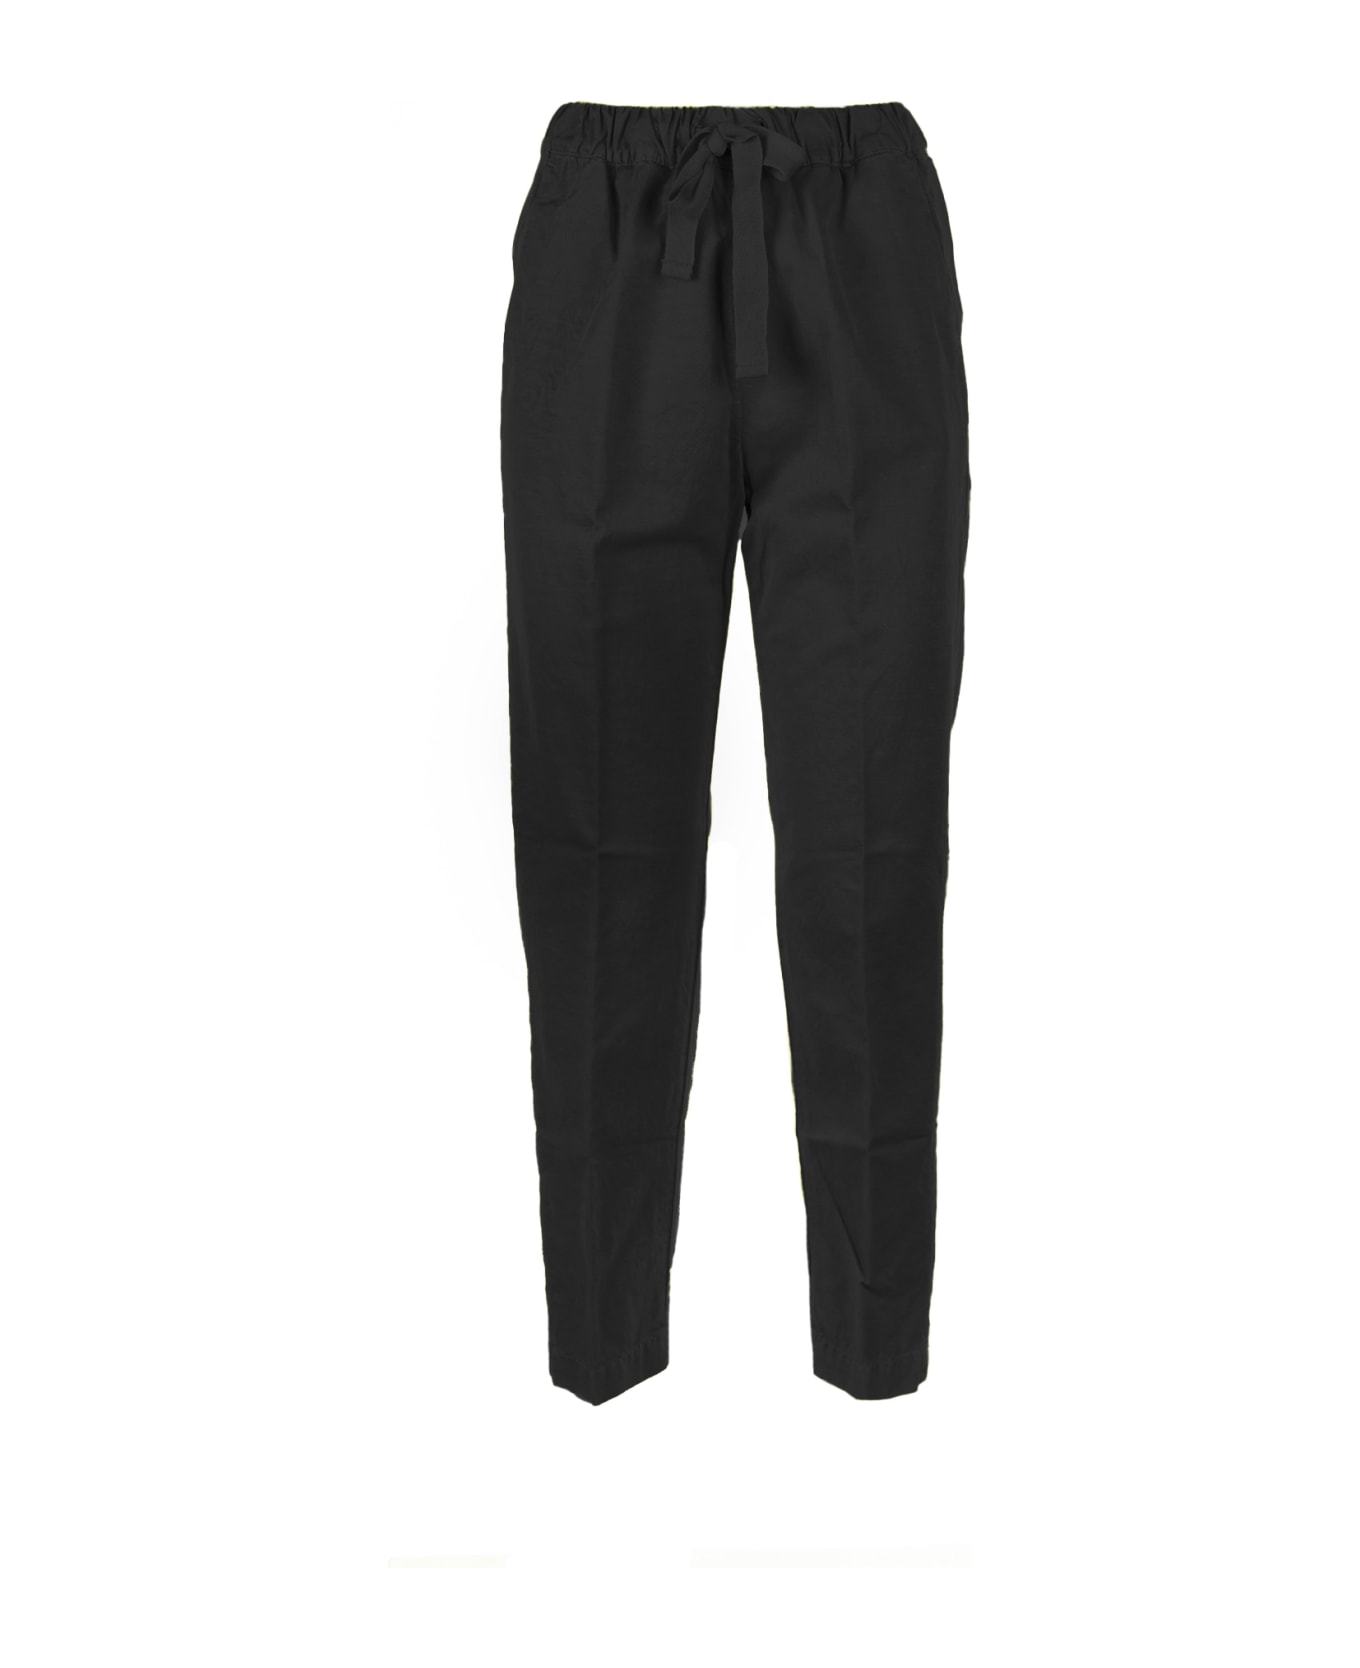 Myths Black High-waisted Trousers With Drawstring - NERO ボトムス